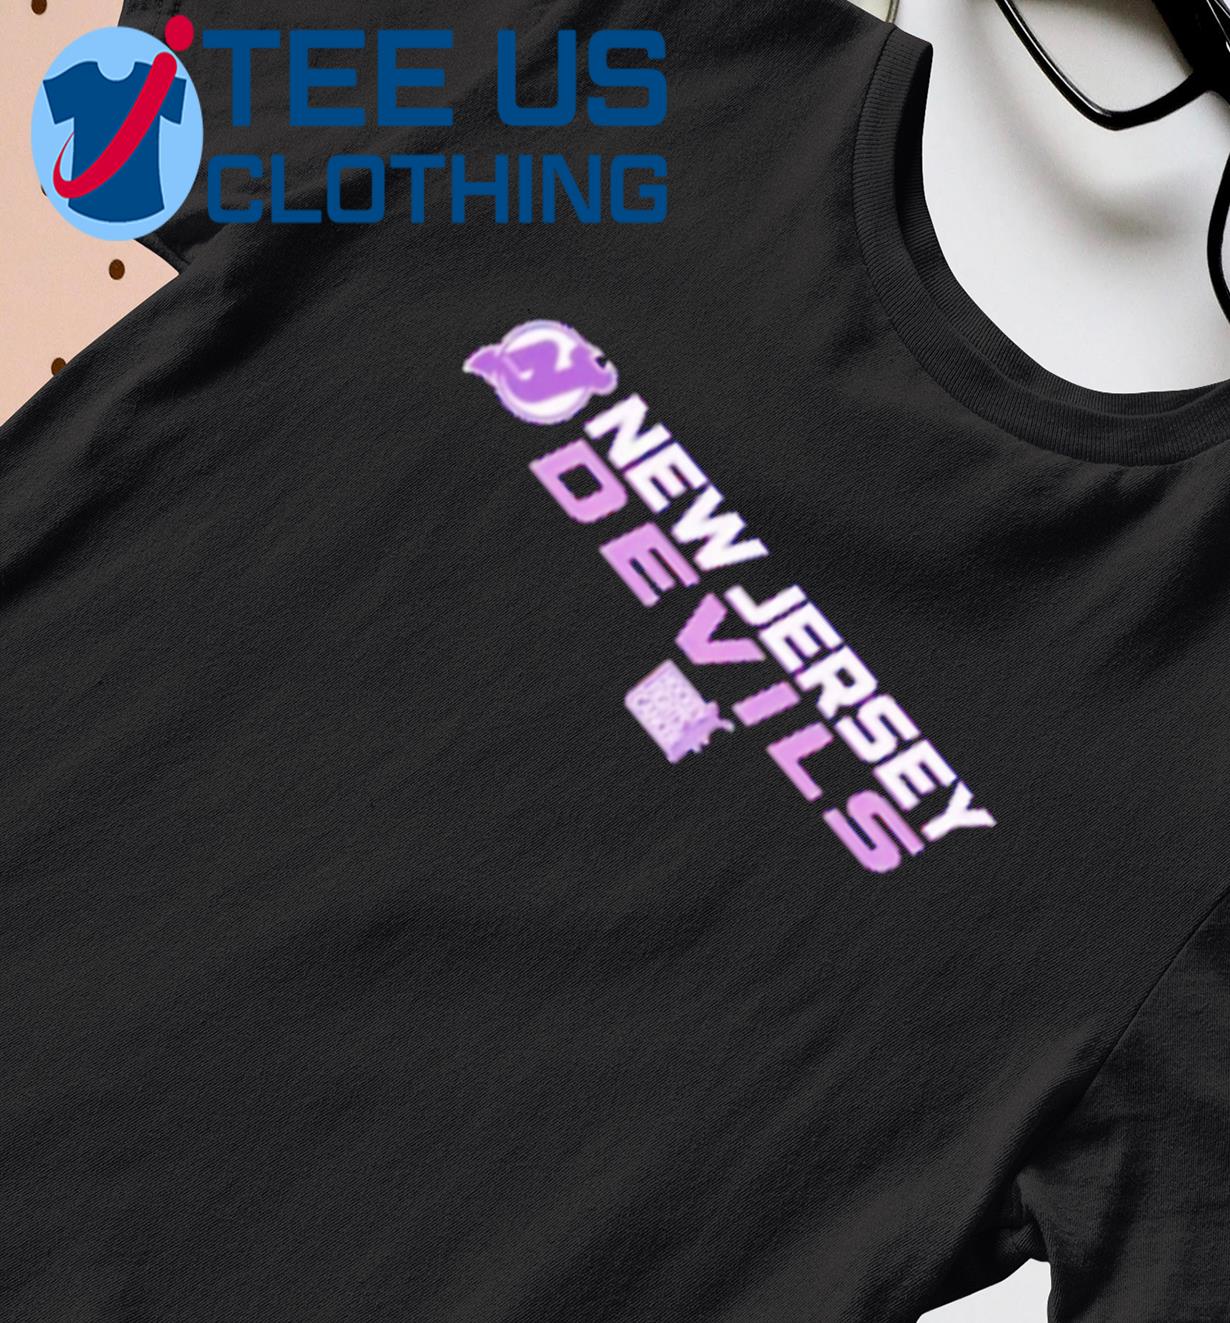 New Jersey Devils Hockey Fights Cancer T-Shirt